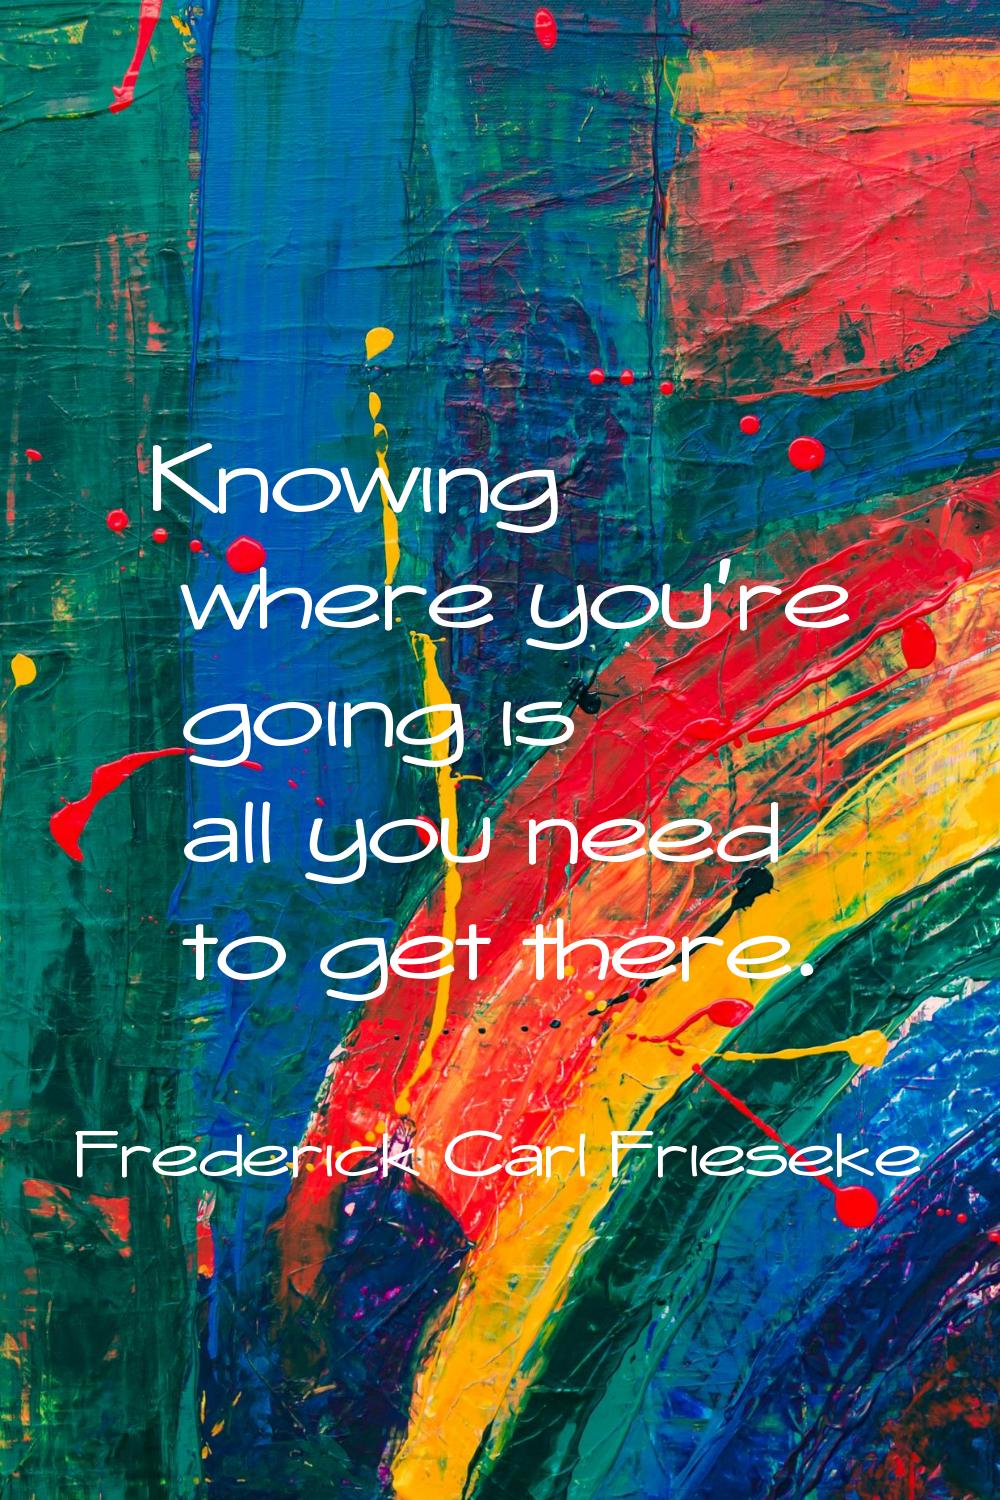 Knowing where you're going is all you need to get there.